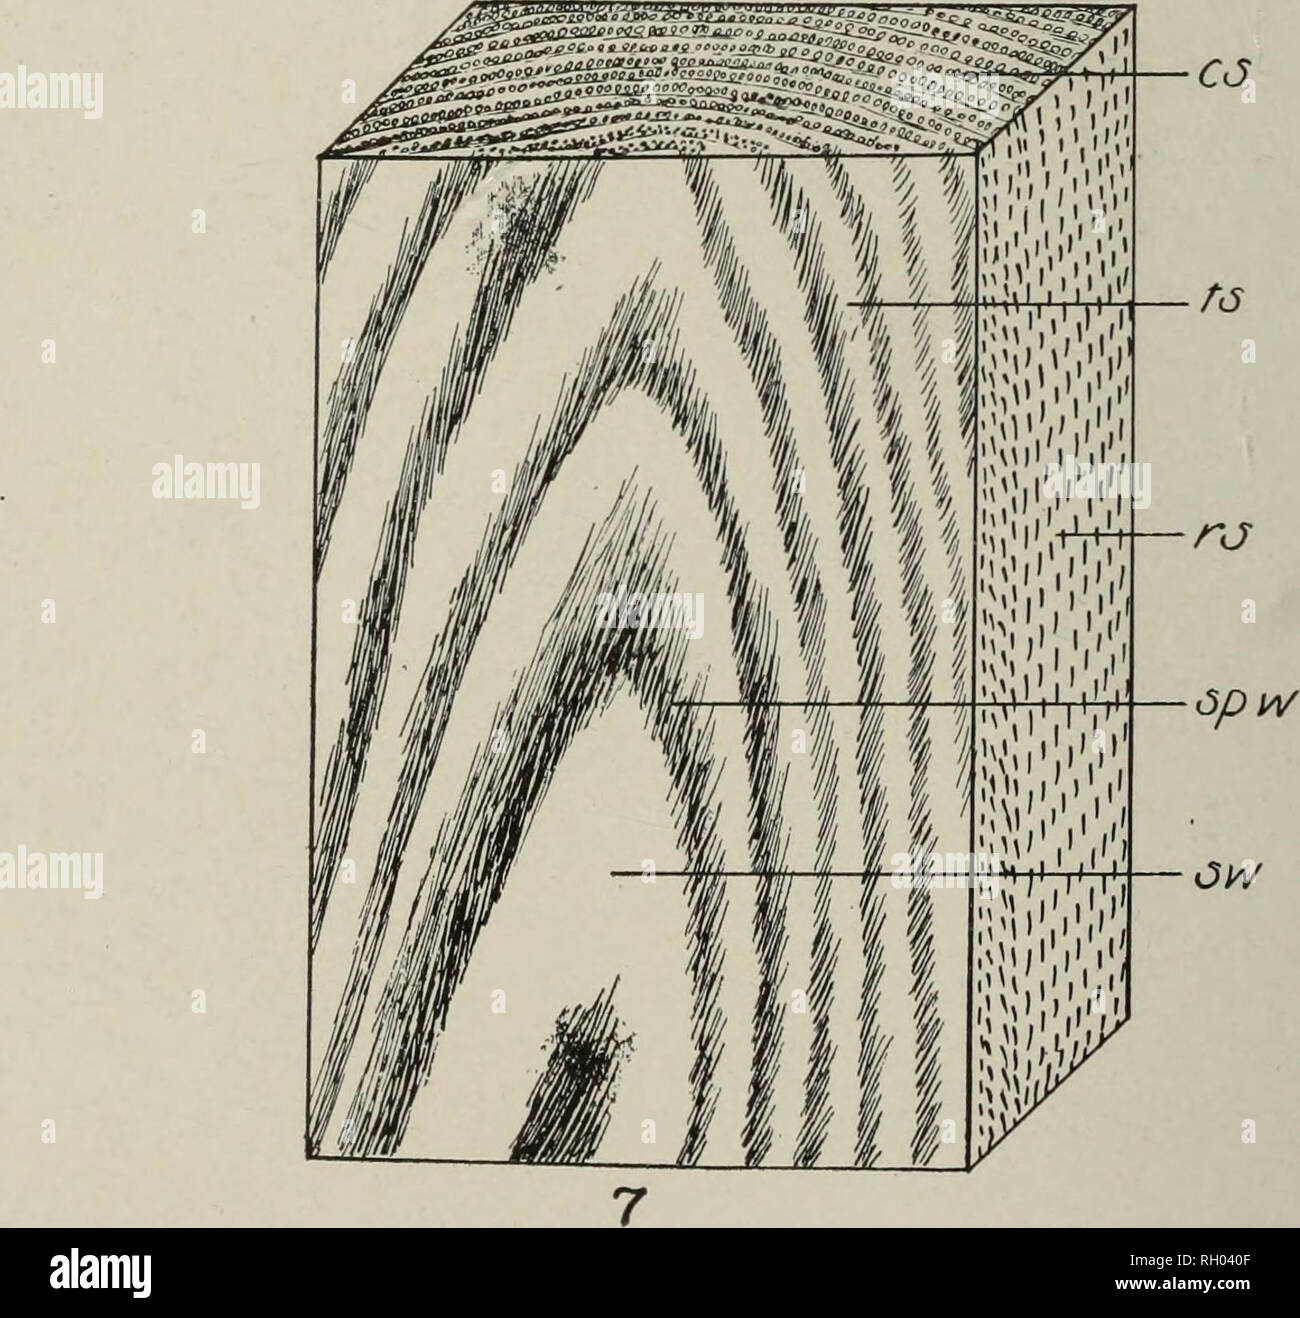 . Bulletin. Forests and forestry. PLATE XI. THE STRUCTURE OF WOOD. 1. Cross section of six-year old stem of White Pine showing (b) bark, (c) cambium, (ar) annual ring, (p) pith, and (rp) numerous small circular resin passages, natural size. 2. A resin passage with bounding epithelial cells, enlarged. 3. Non-porous wood of White Pine showing (spw) spring Avood, (sw) summer wood, (ar) annual ring, and (rp) resin passage, x 3. 4. Ring-porous wood of Chestnut, x 2. 5. King-porous wood of Red Oak, showing large medullary rays, x 3. 6. DifL'use-porous wood of Beech, x 4. 7. Block of Chestnut wood sh Stock Photo